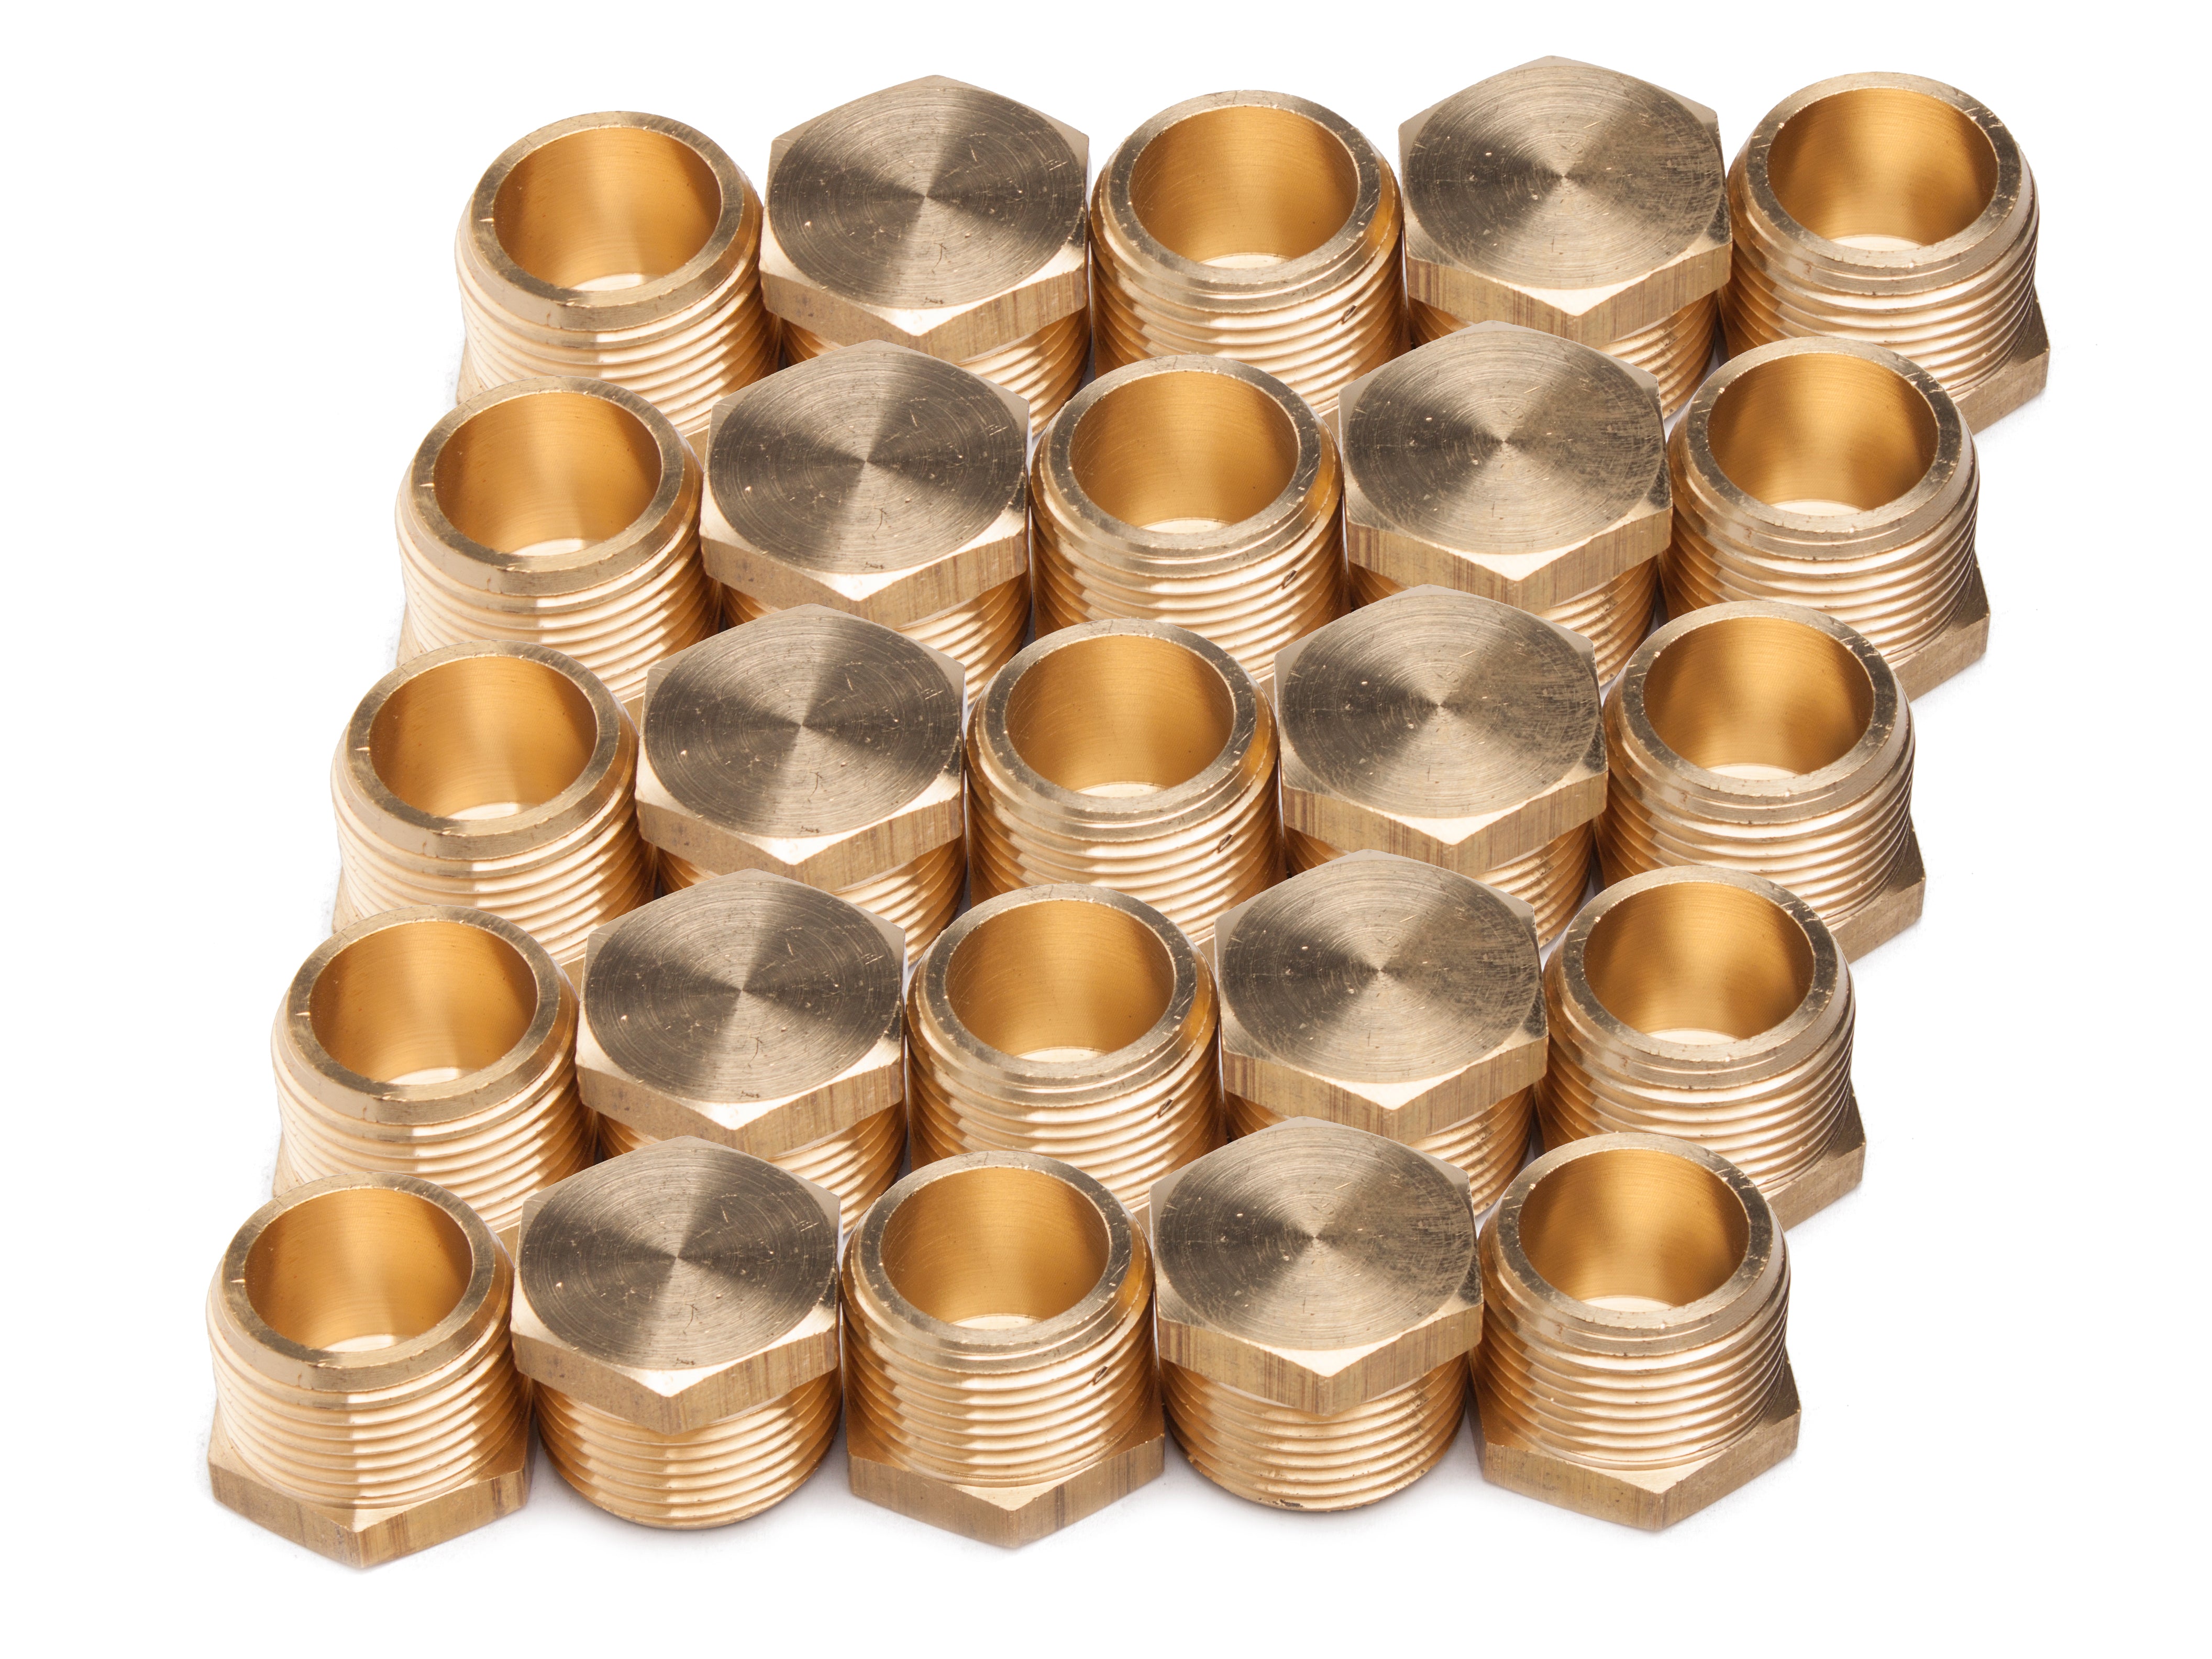 LTWFITTING Brass BSP Pipe Hex Head Plug Fittings 3/4-Inch Male BSPP Air Fuel Water Boat (Pack of 25)